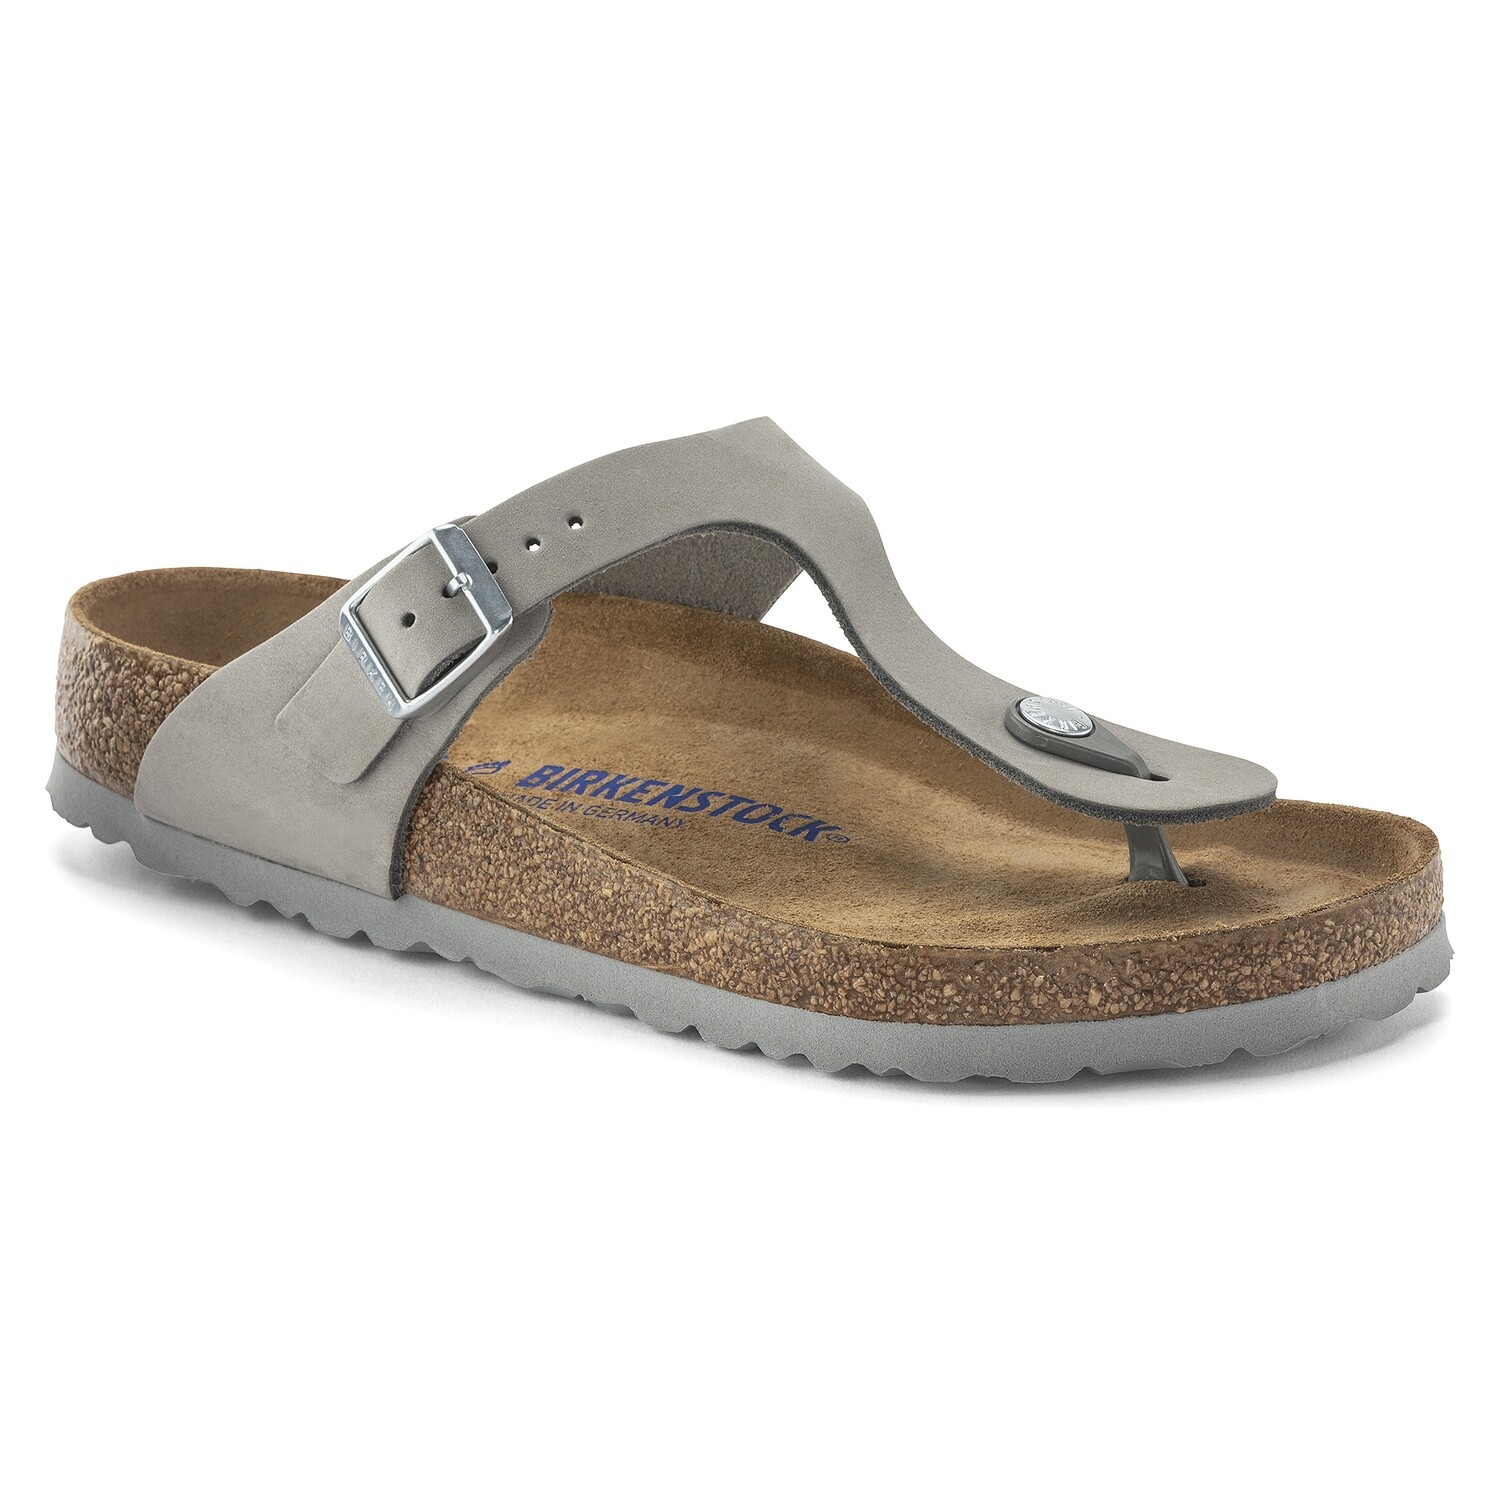 Gizeh Soft Footbed Nubuck, Color: Dove Gray, Size: 36R